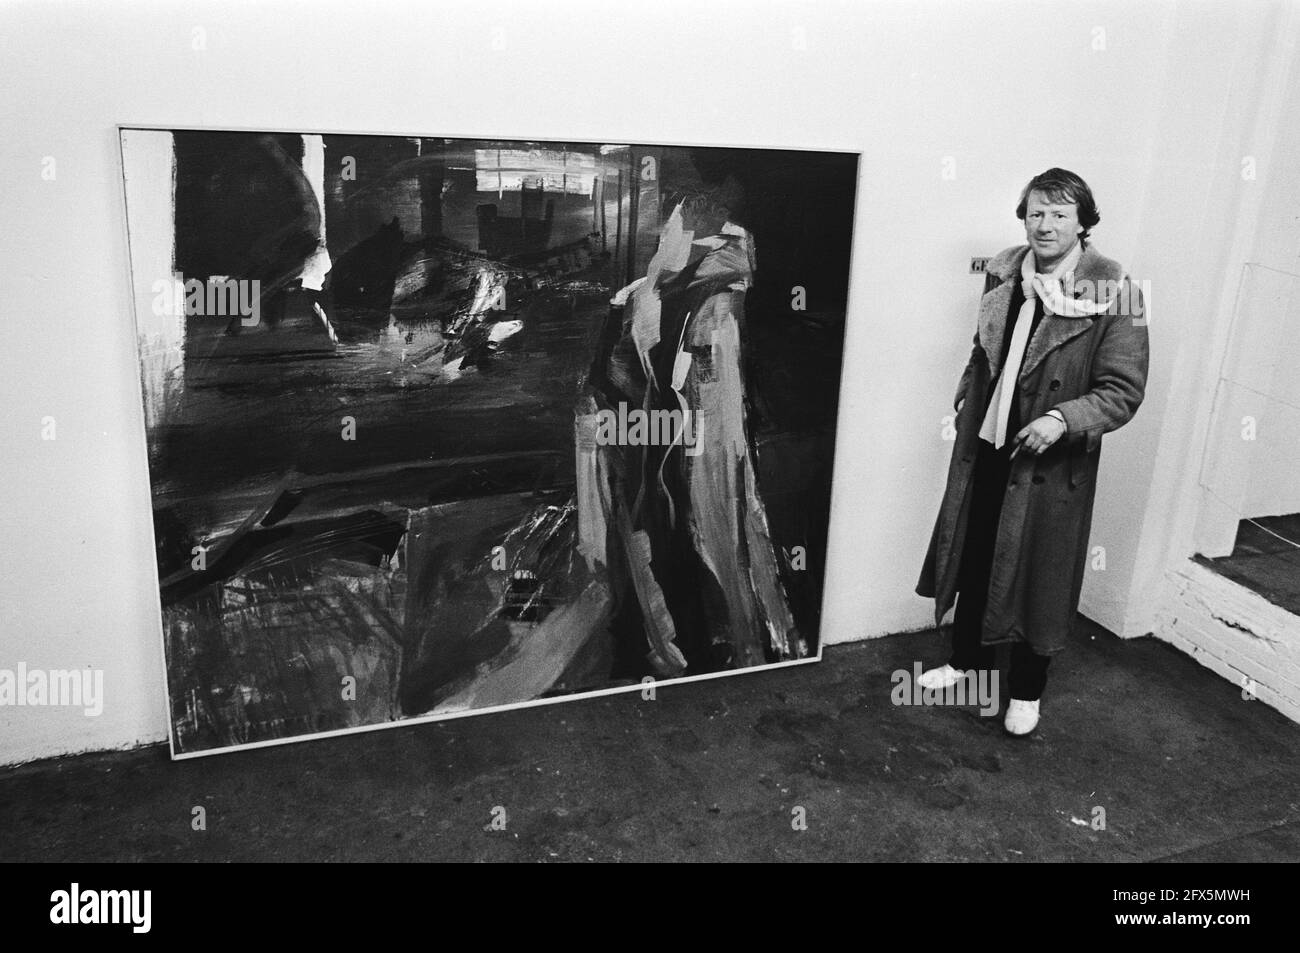 Volger work, January 7, 1983, painting, exhibitions, The Netherlands, 20th century press agency photo, news to remember, documentary, historic 1945-1990, visual stories, human history of the Twentieth Century,